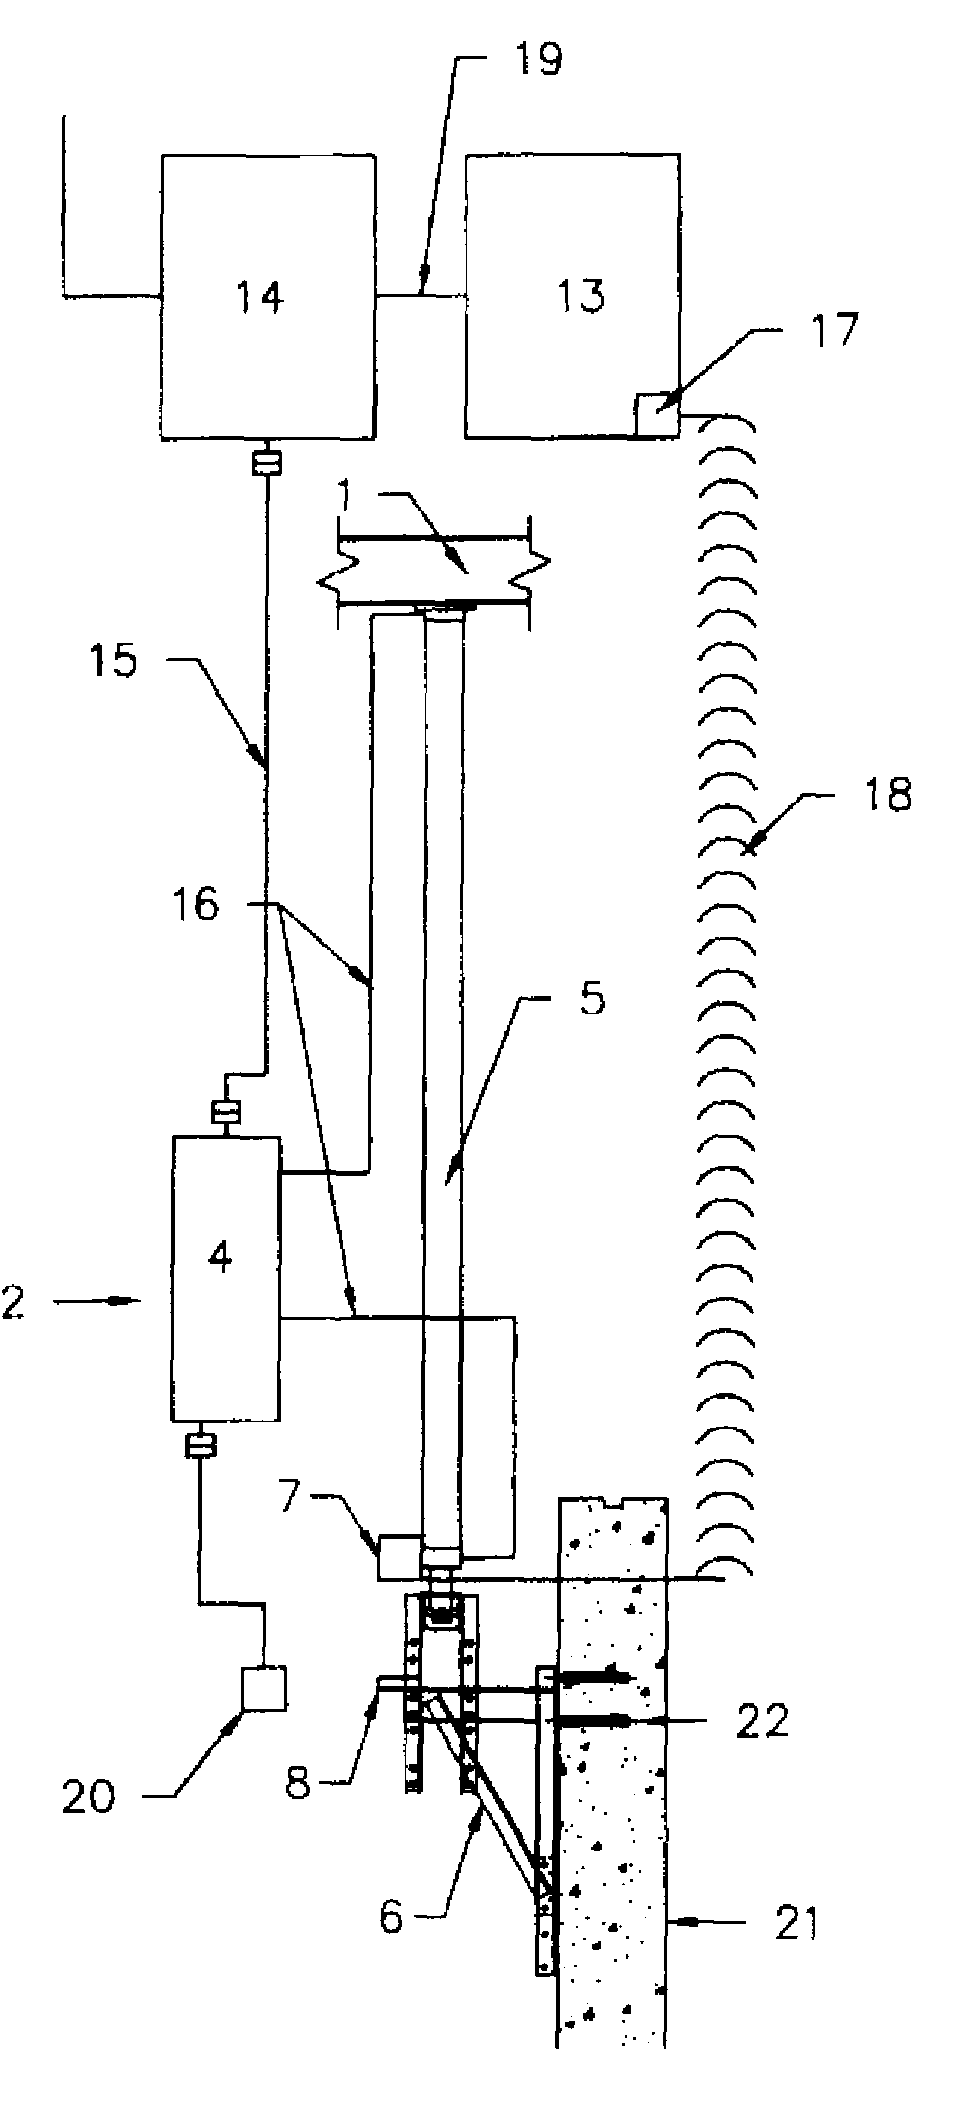 Self-raising form control system and method